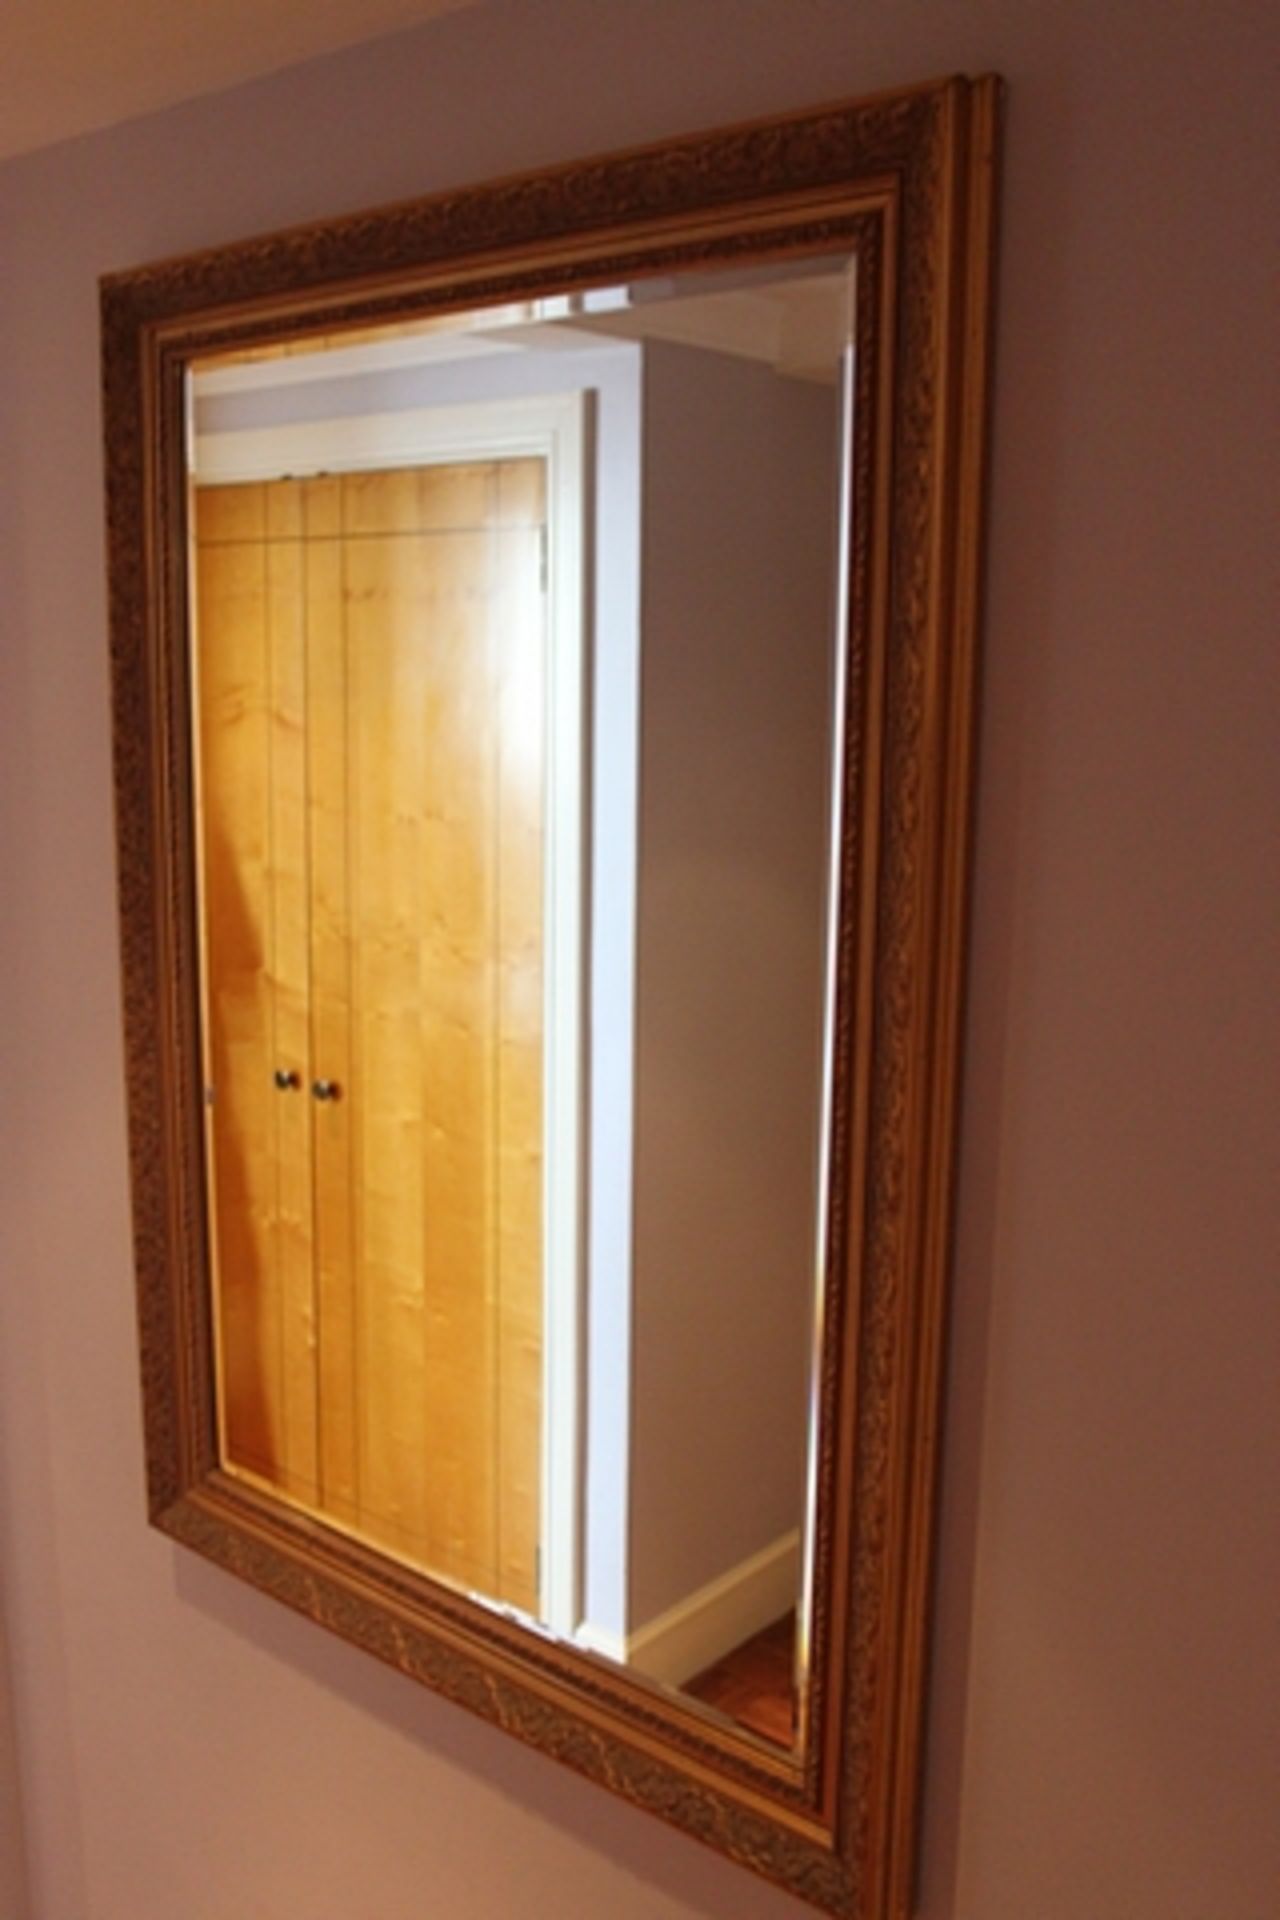 Classic style traditional gold gilt framed mirror can be hung in the landscape or portrait